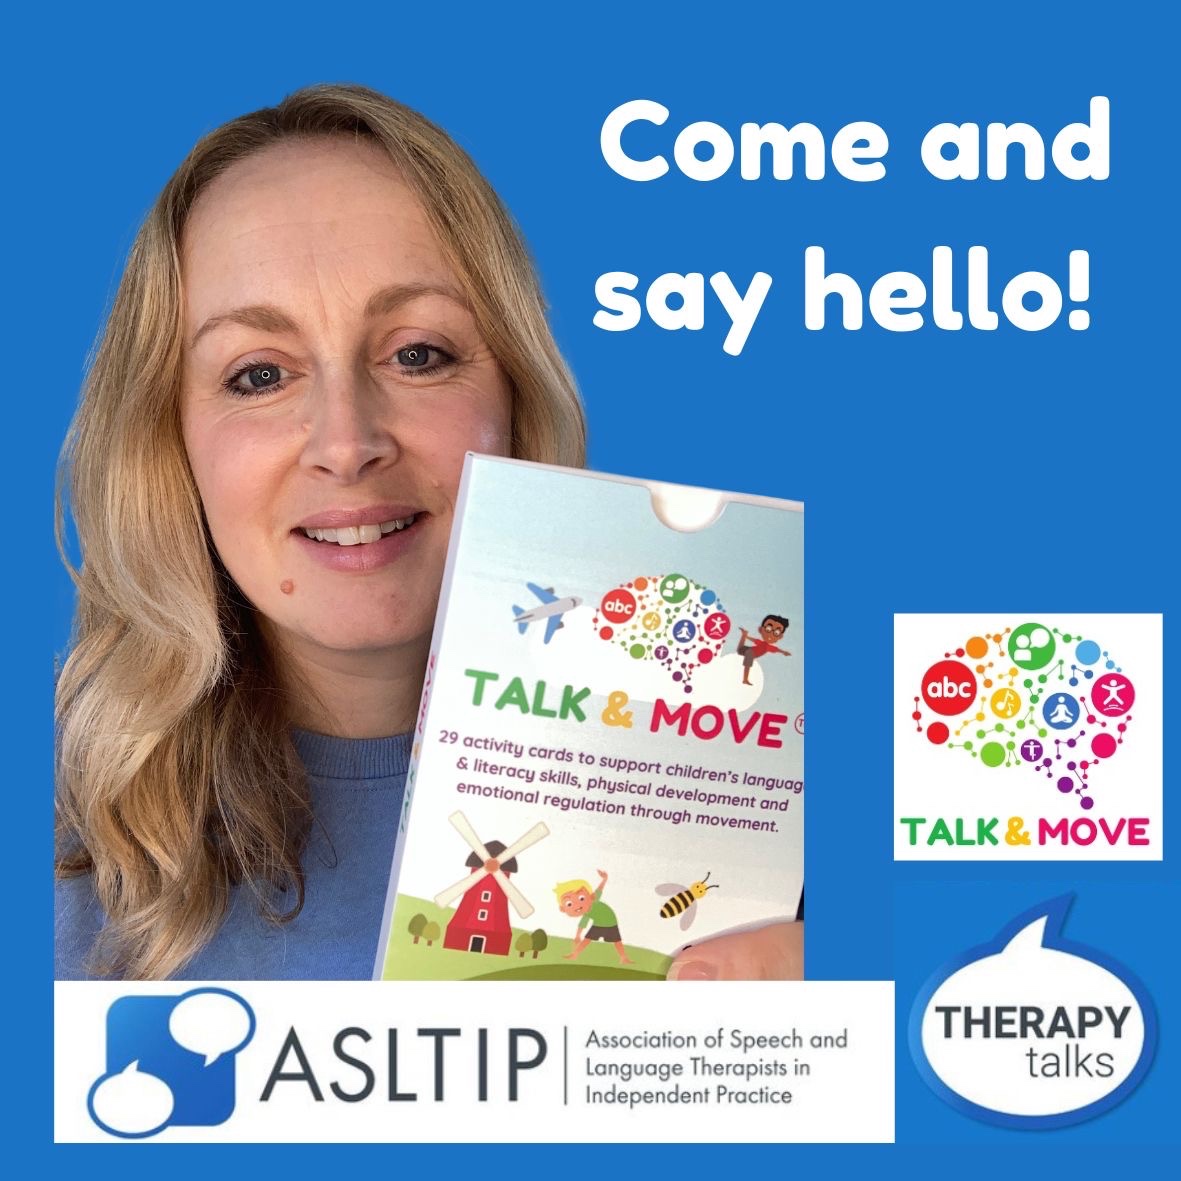 Looking forward to introducing Talk & Move to my friends and colleagues @_ASLTIP Therapy Talks today. Come and say hi!
#asltiptherapytalks #asltip #rcslt